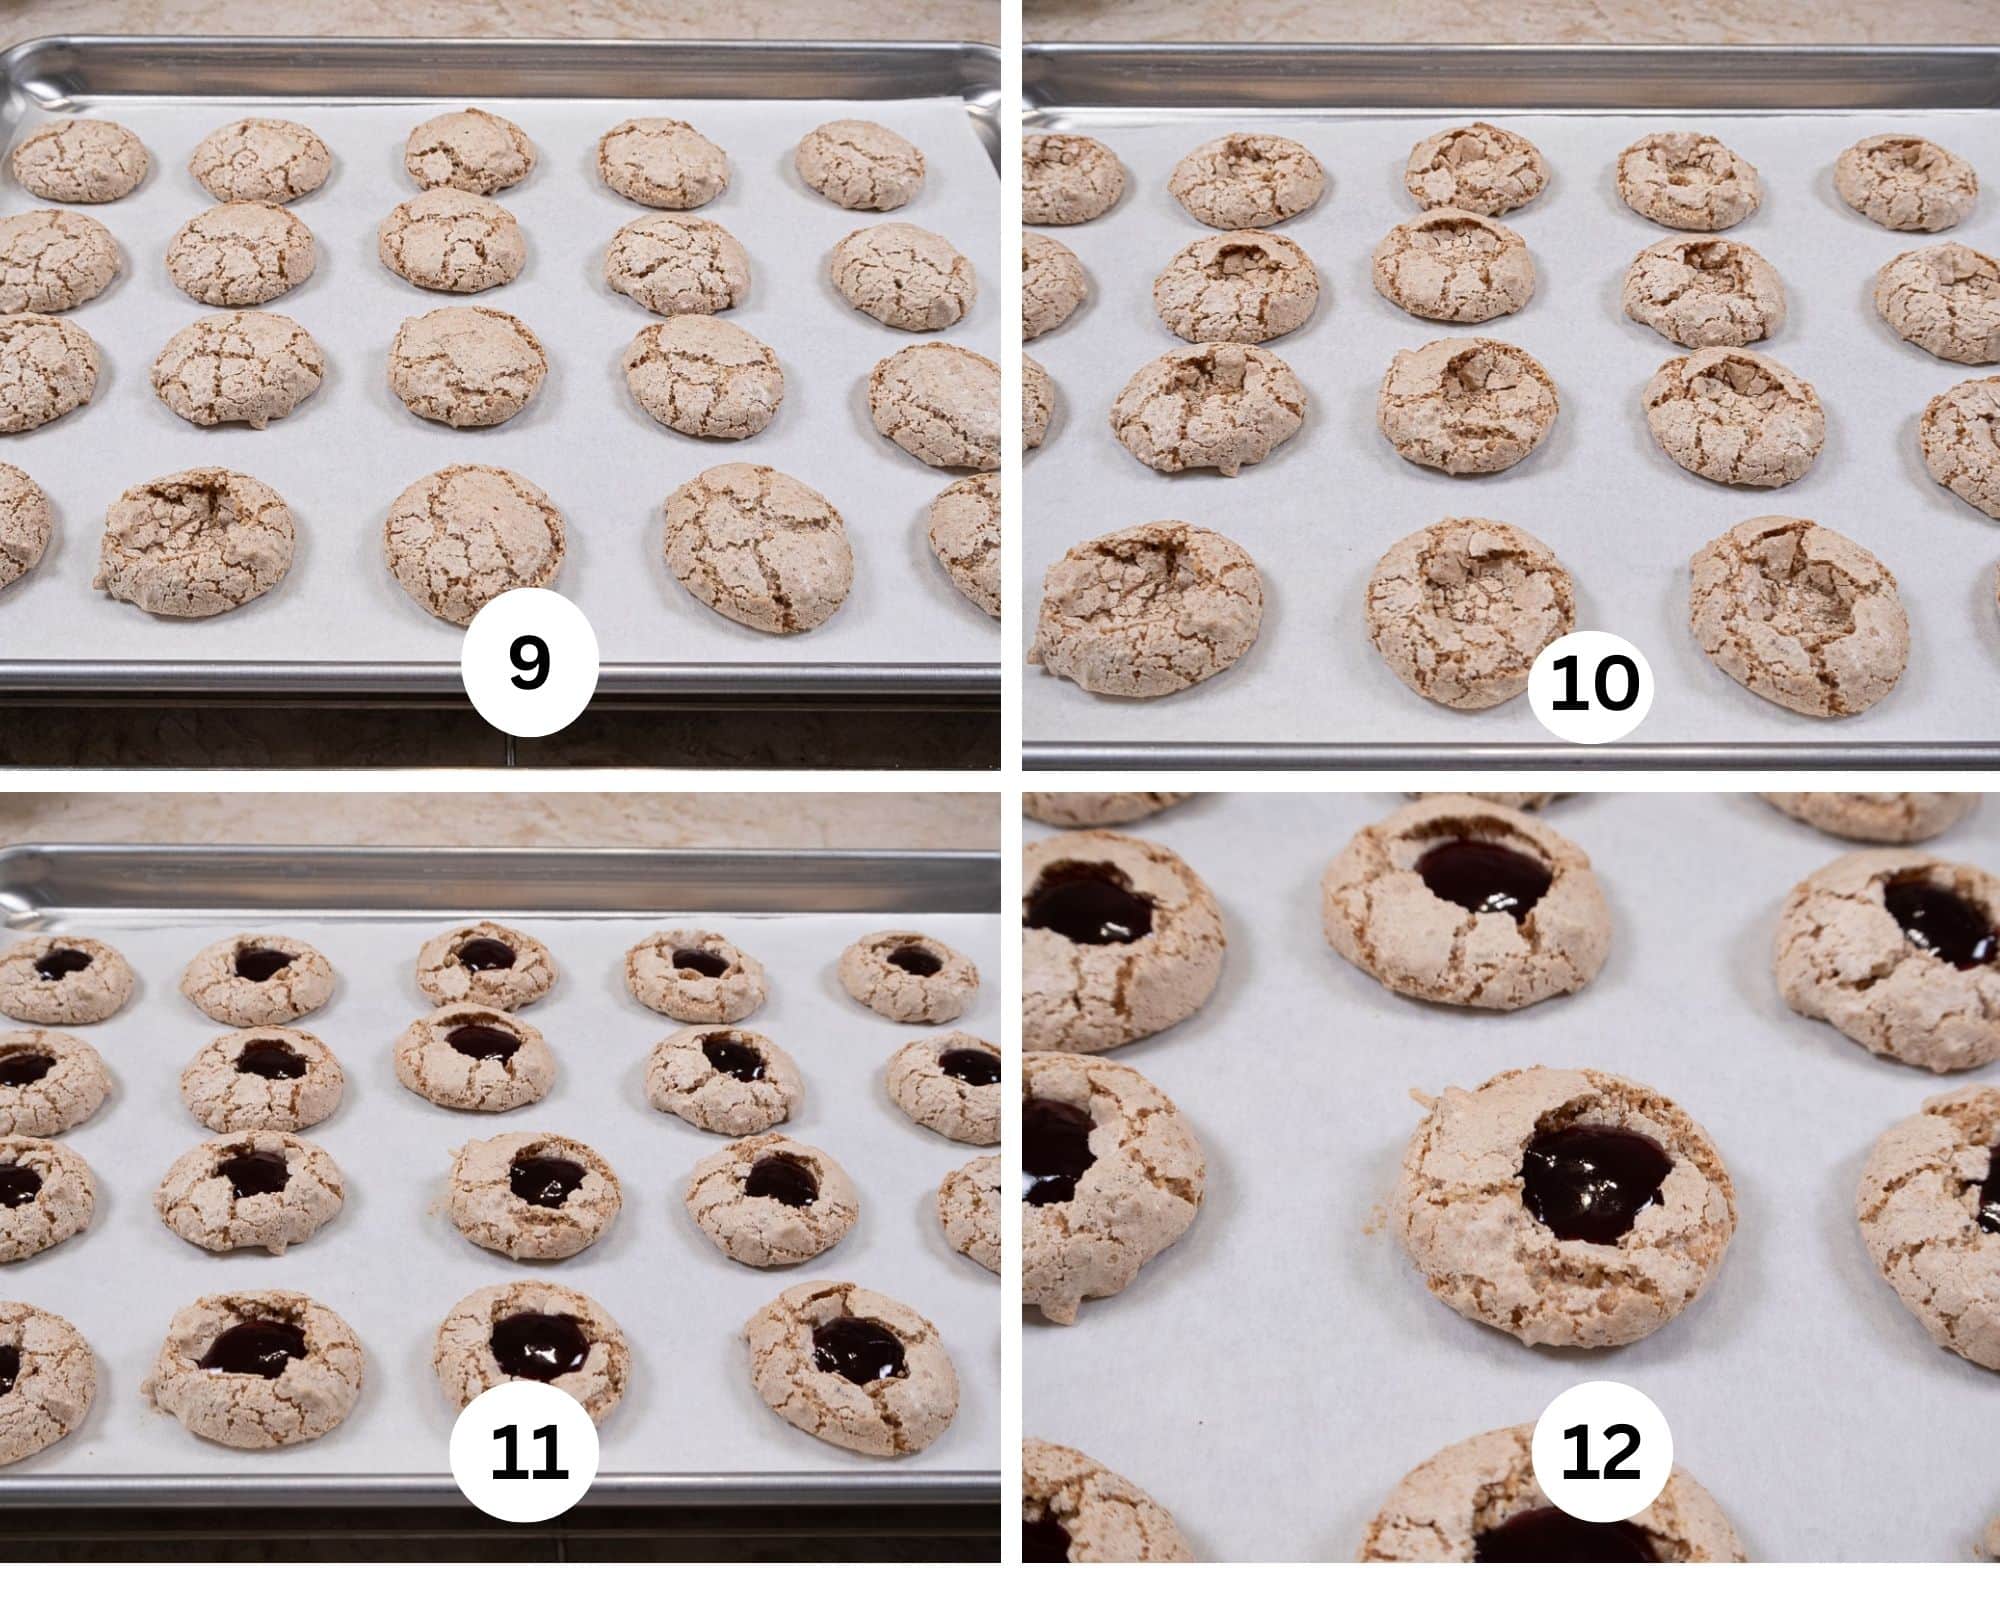 The last collage shows the baked cookies, a tray with the centers made, and the cookies filled.